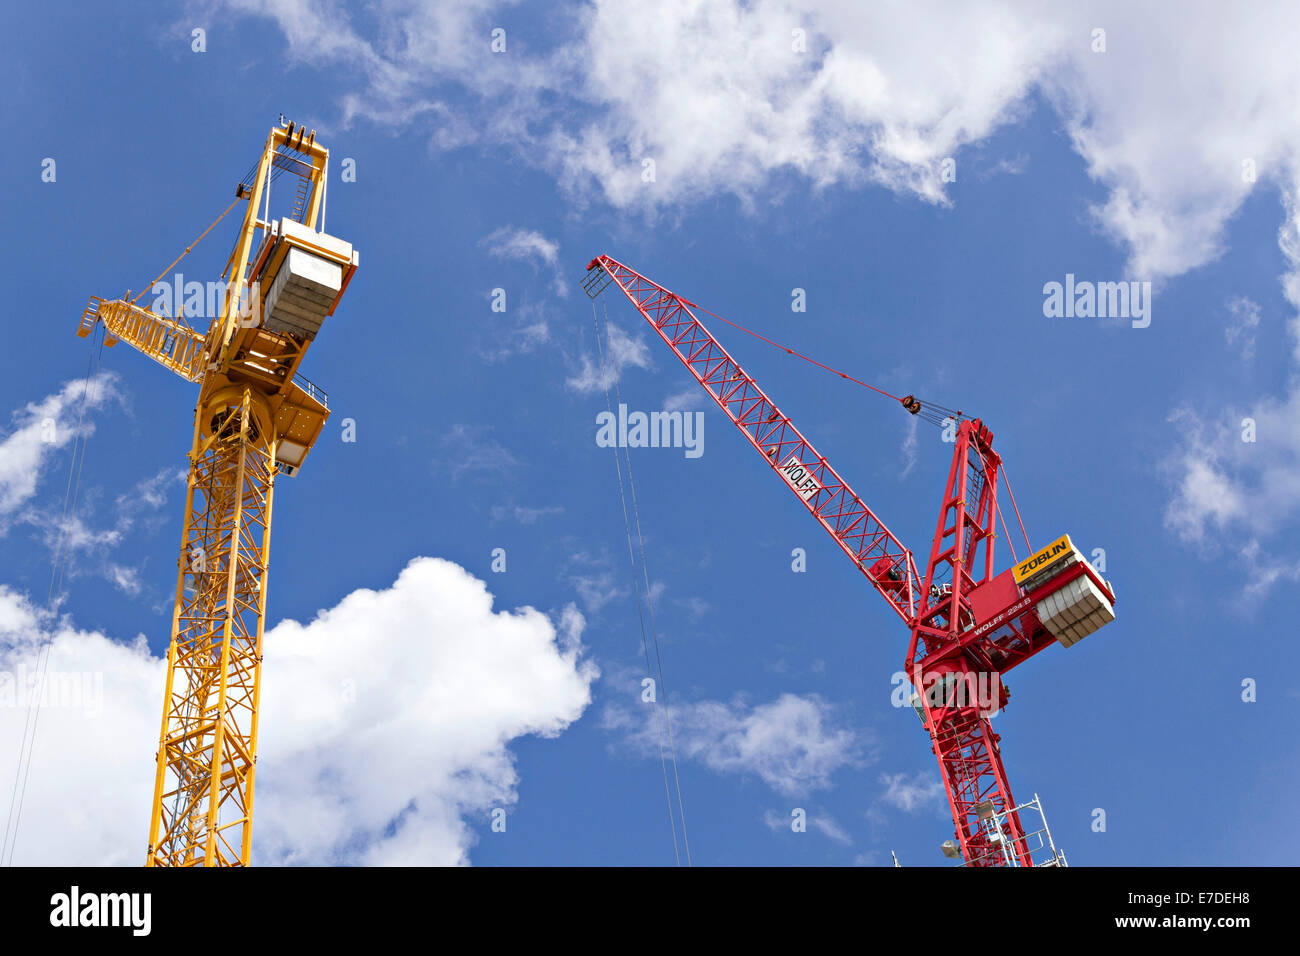 Industrial cranes against cloudy blue sky Stock Photo